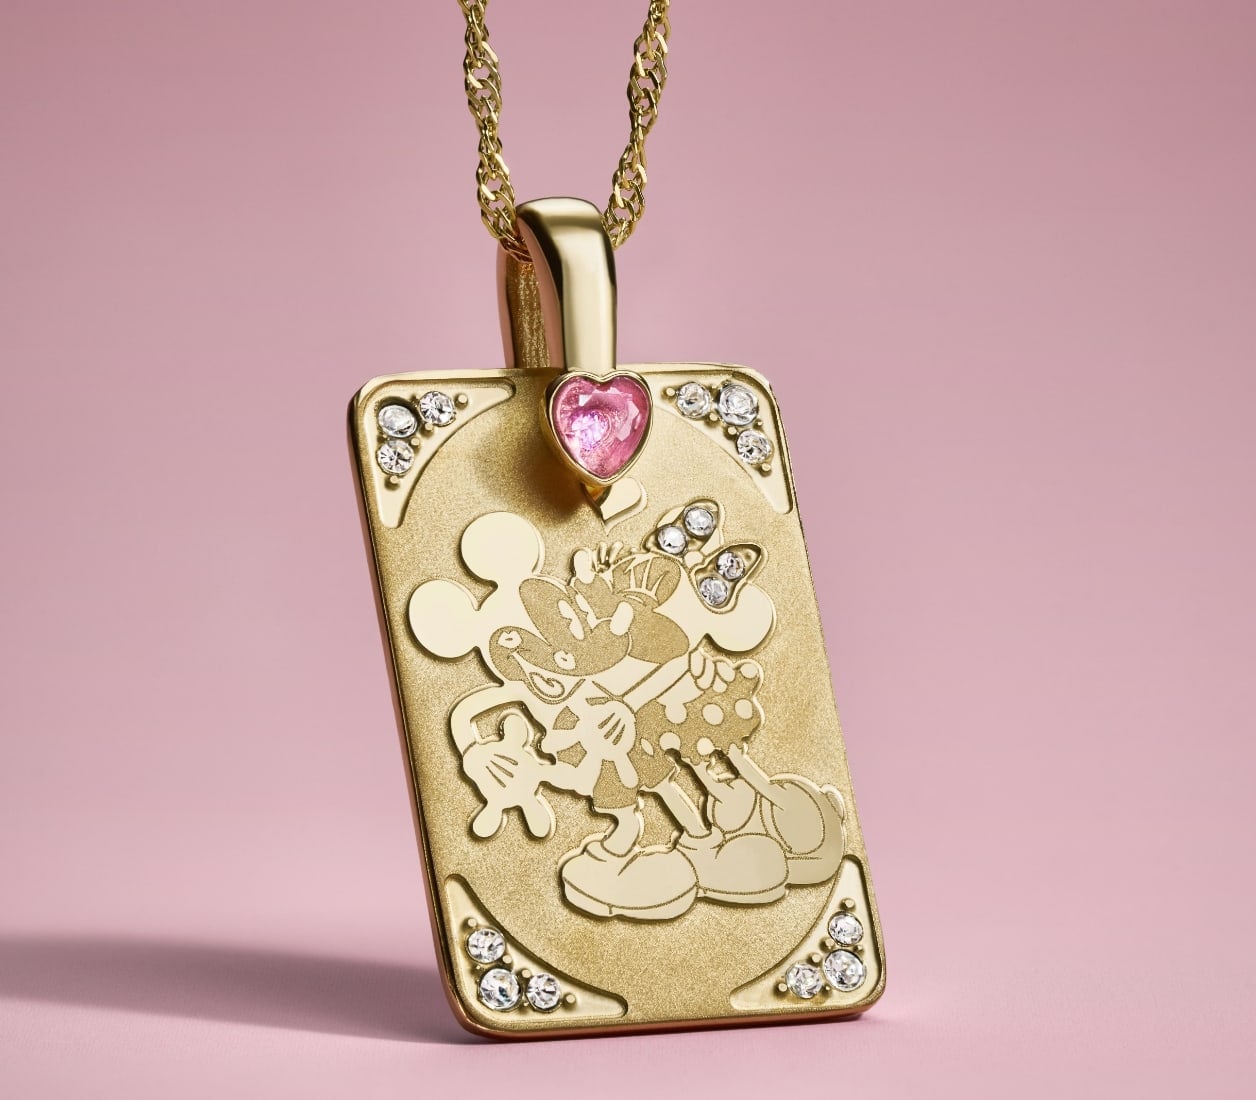 The gold-tone pendant necklace featuring Mickey Mouse, Minnie Mouse and crystal accents.